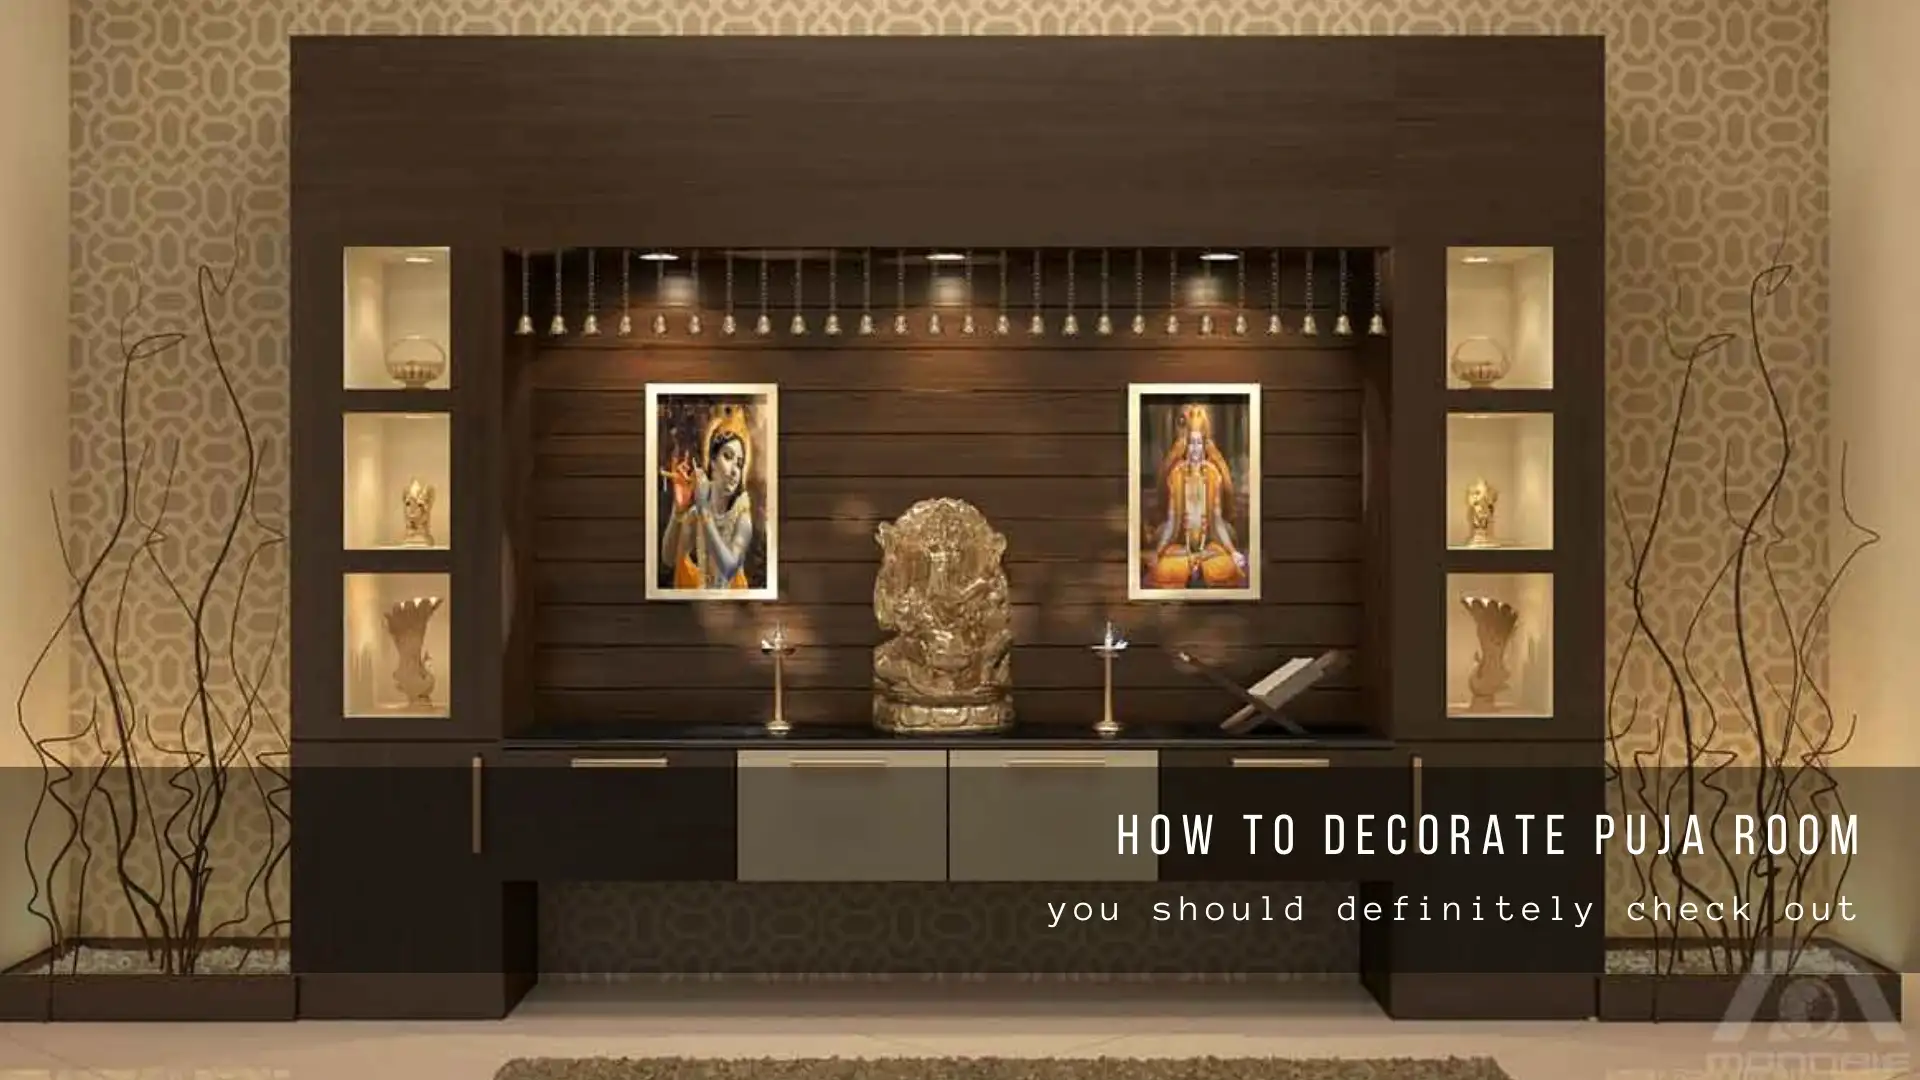 Ten Simple Ways to Decorate a Puja Room • Swami Interior